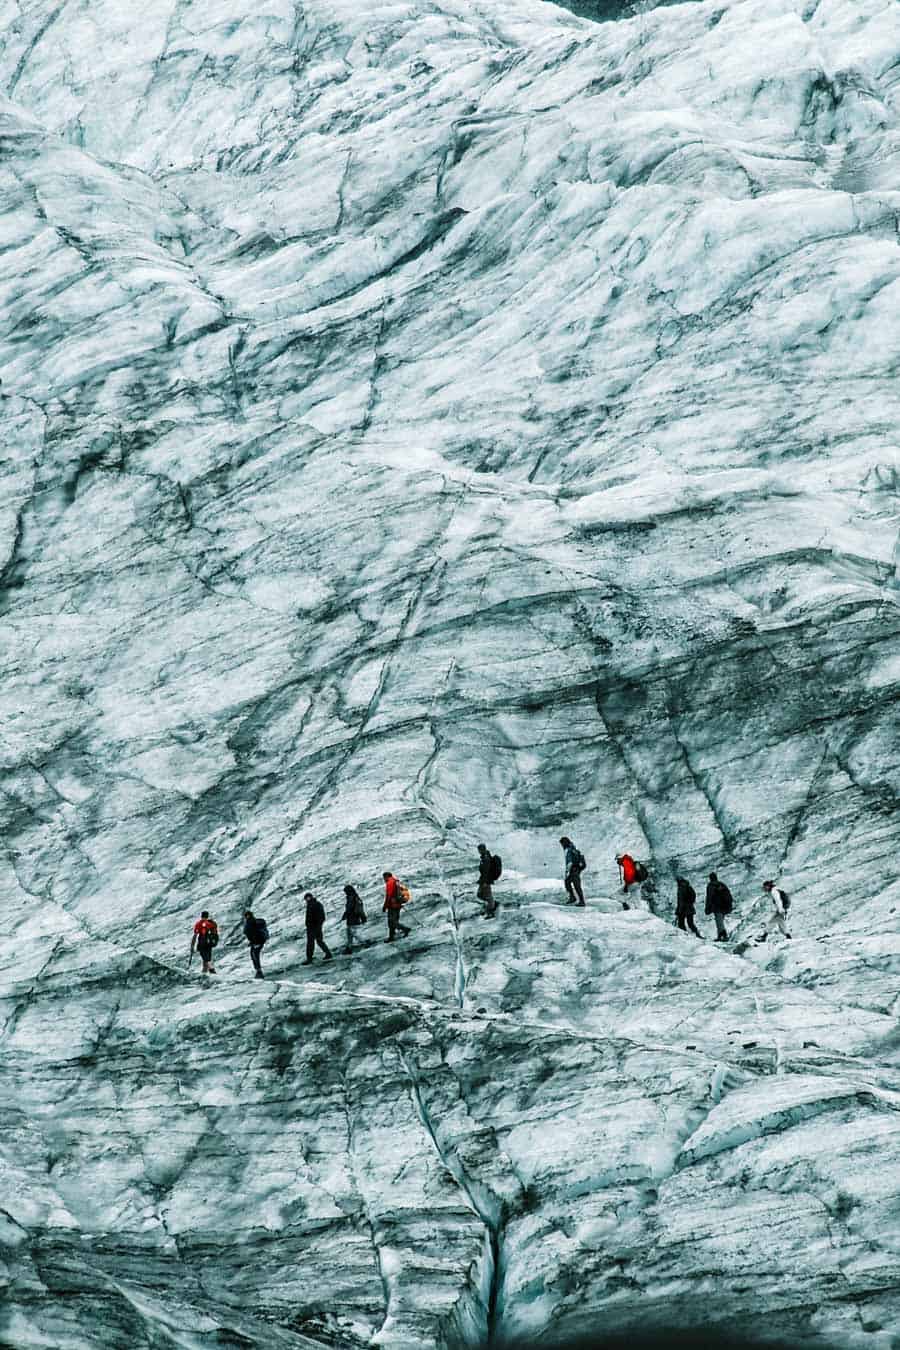 20 Most Beautiful Places in New Zealand! Glacier Walk on Fox Glacier. is one of the top beauties of New Zealand